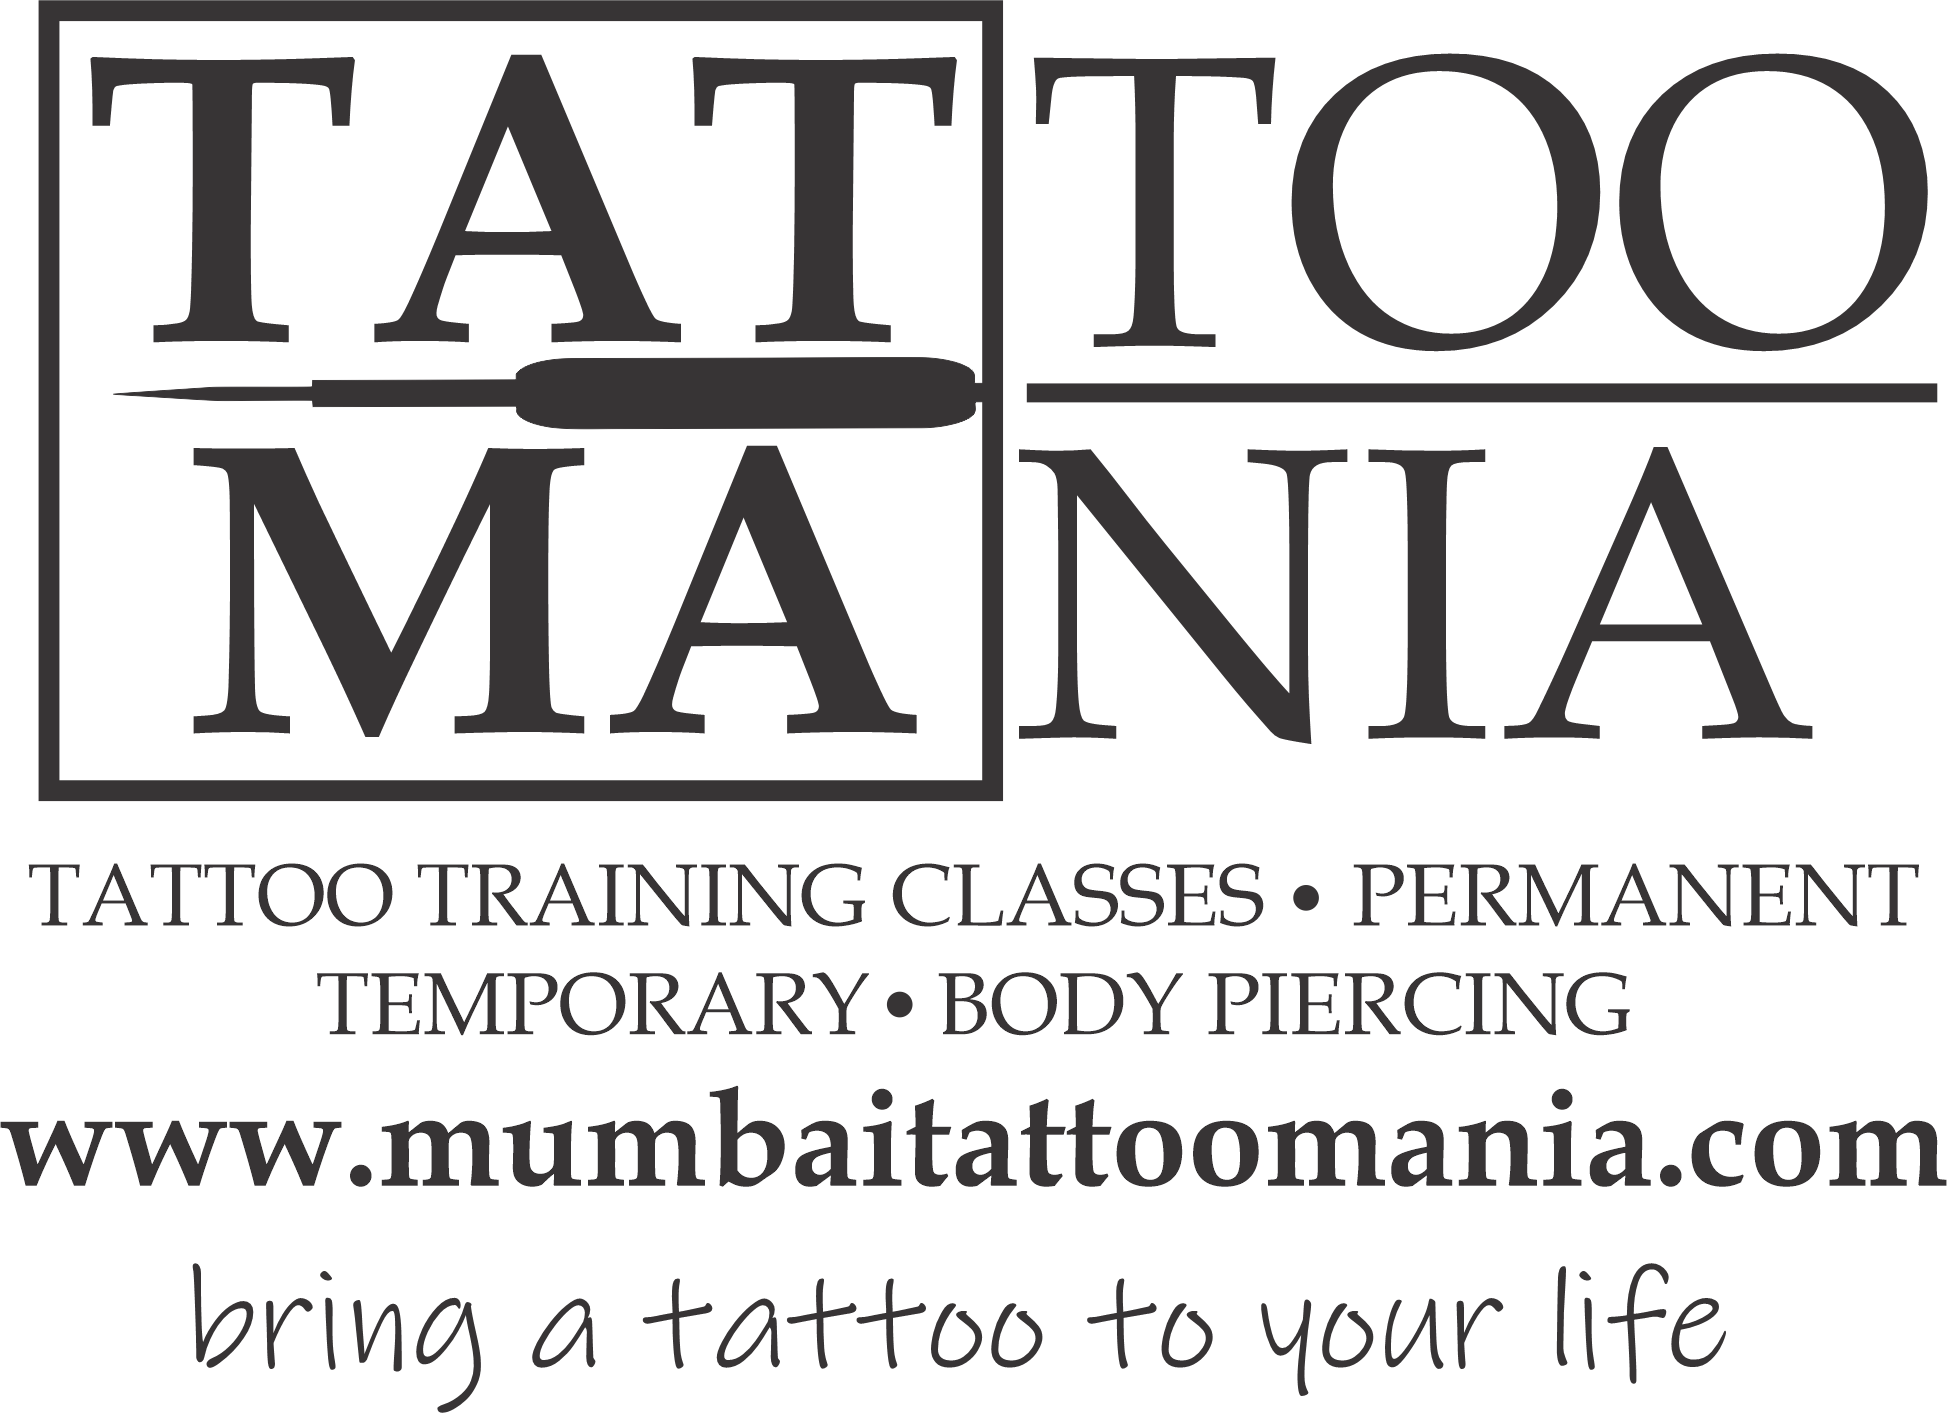 PRIVĒ International Academy - 𝑴𝑰𝑵𝑰𝑴𝑨𝑳𝑰𝑺𝑻 𝑻𝑨𝑻𝑻𝑶𝑶 𝑪𝑶𝑼𝑹𝑺𝑬  (BODY ART TATTOO) Qualified Enrollee, QUEZON CITY 1 | 28-29 | 2024  👩‍🎓Kathleen Anne M. Rilloraza PHILIPPINES 🇵🇭 “For the things we have to  learn